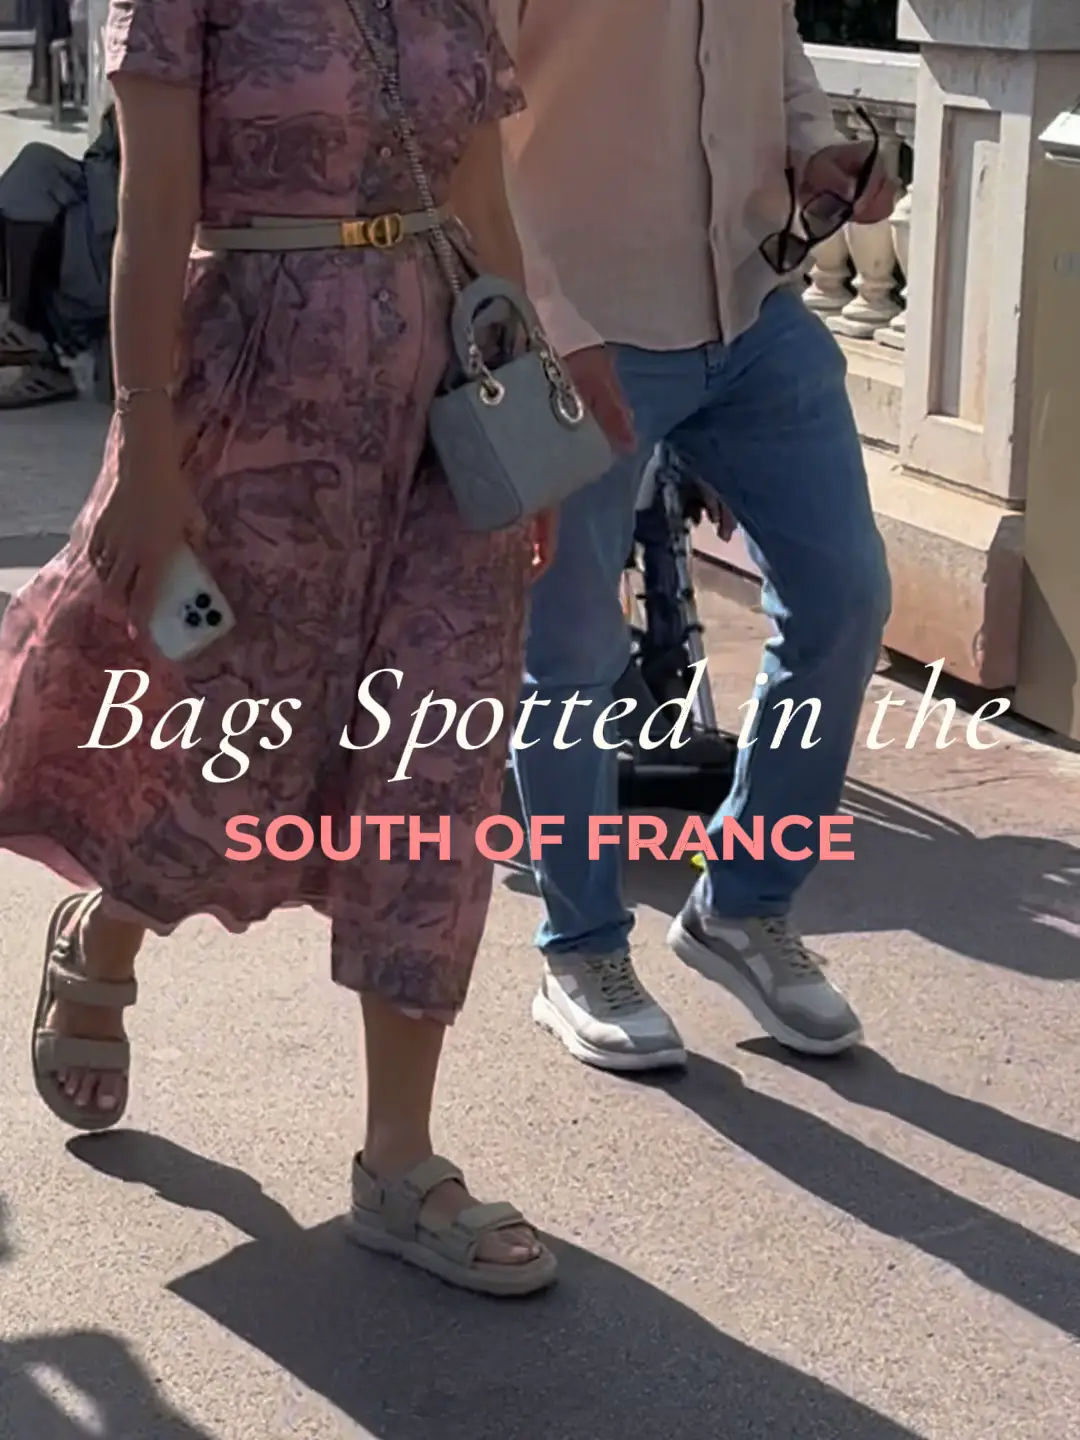 Bags Spotted in the South of France!, Video published by WhatPeopleWear